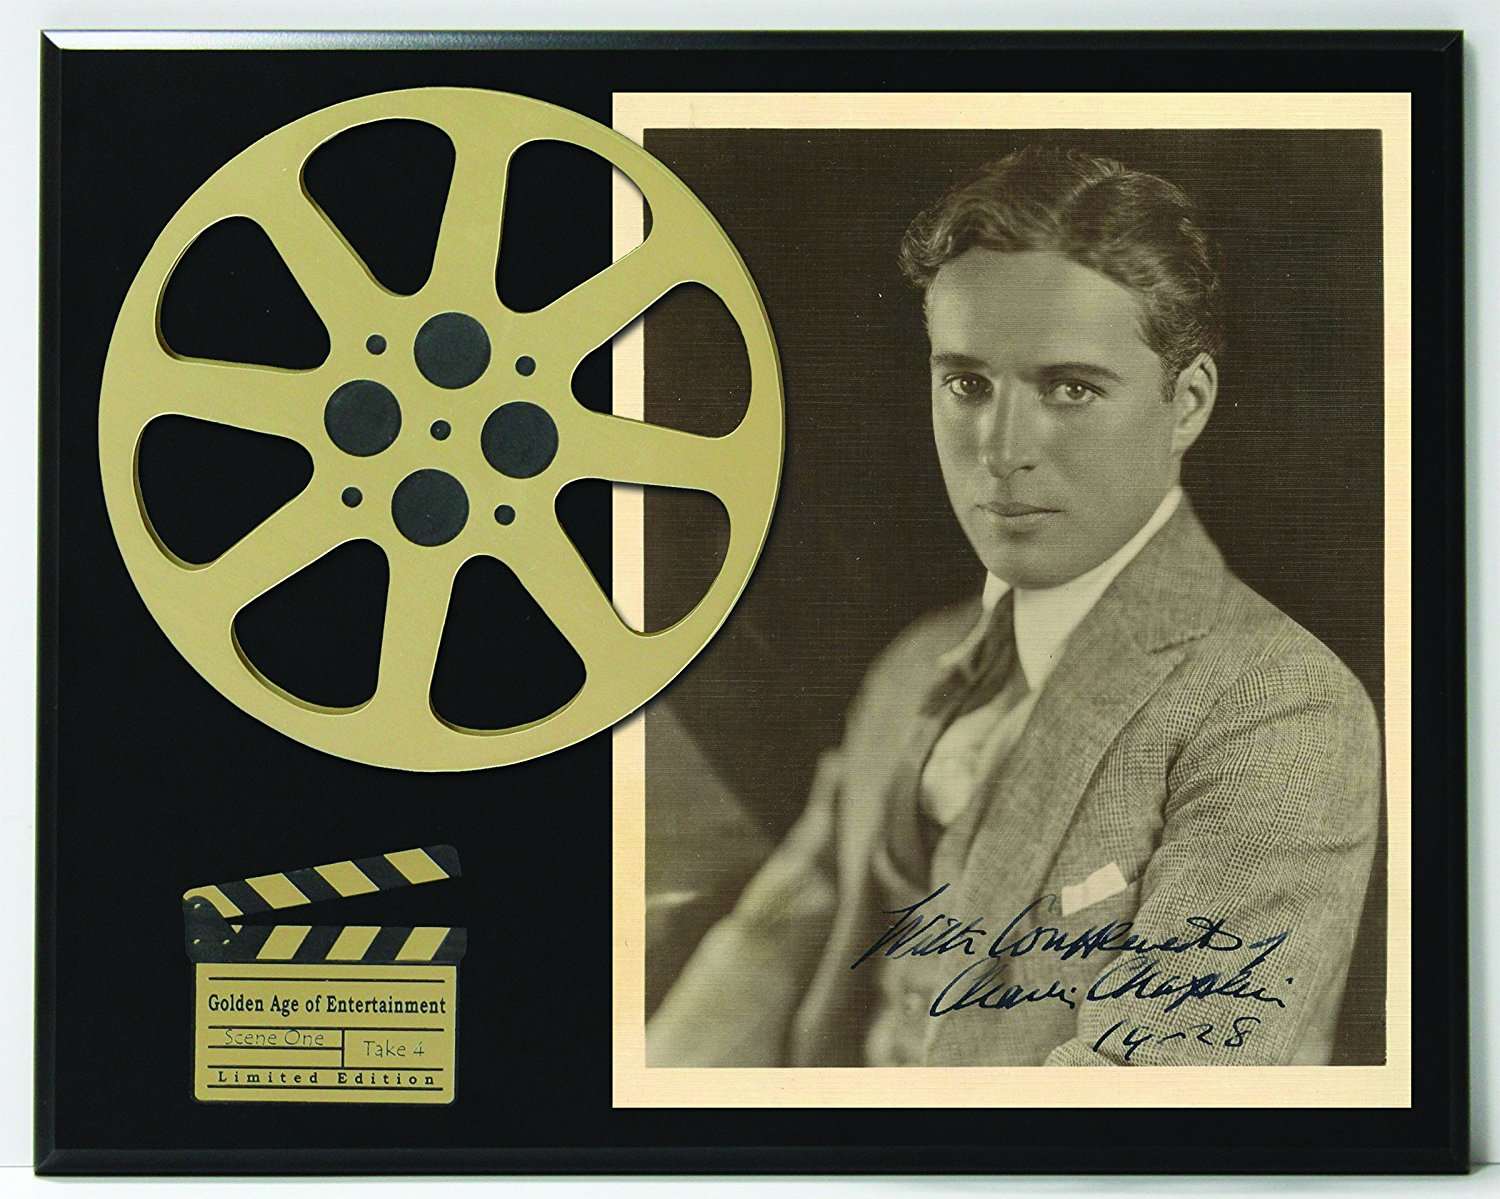 https://goldrecordoutlet.com/wp-content/uploads/imported/Charlie-Chaplin-Limited-Edition-Reproduction-Autographed-Movie-Reel-Display-K1-B01M65BG2K.jpg